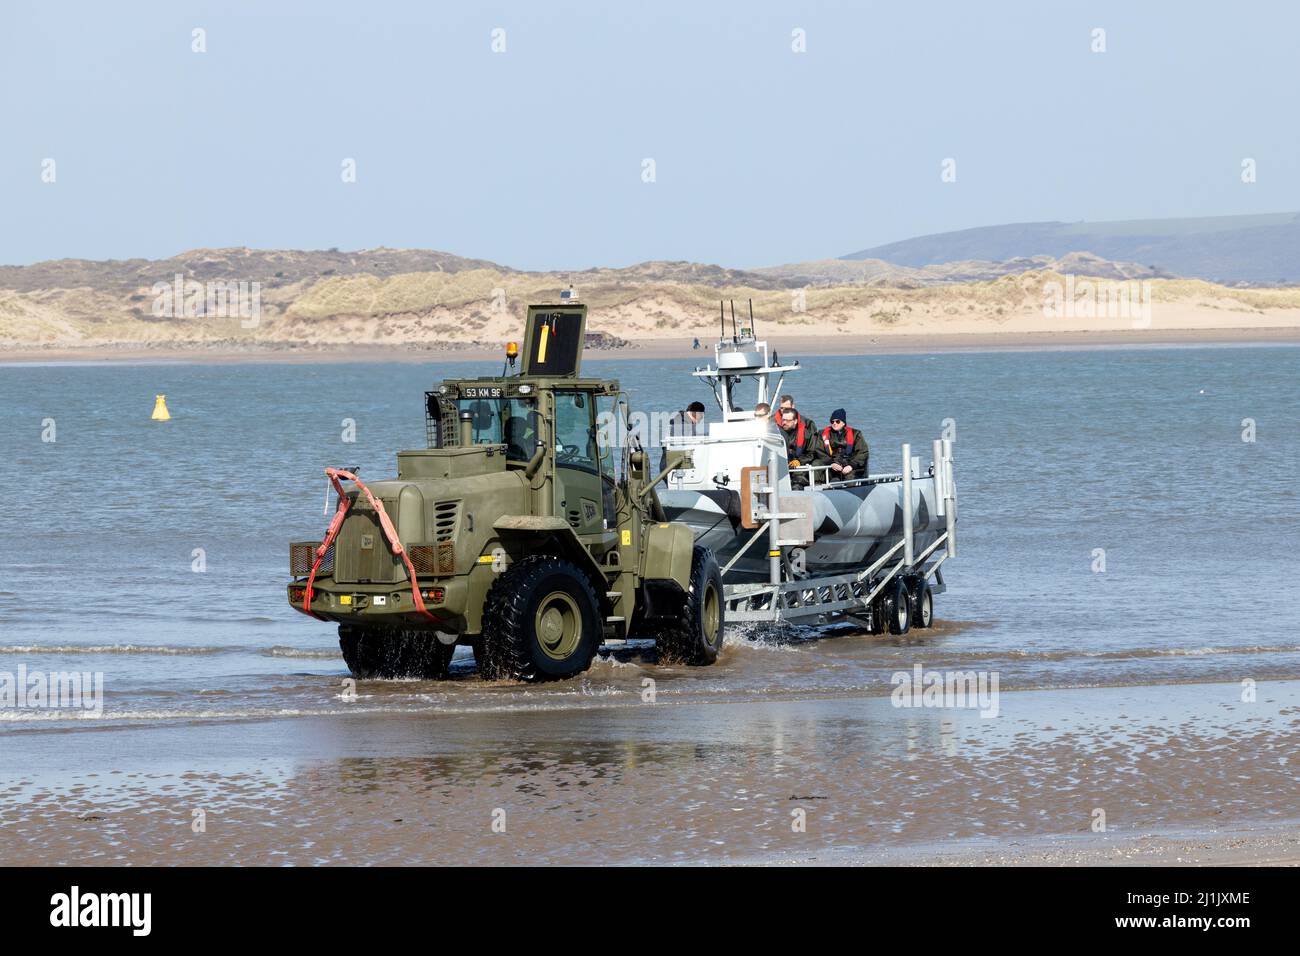 Army manoeuvres in an estuary Stock Photo